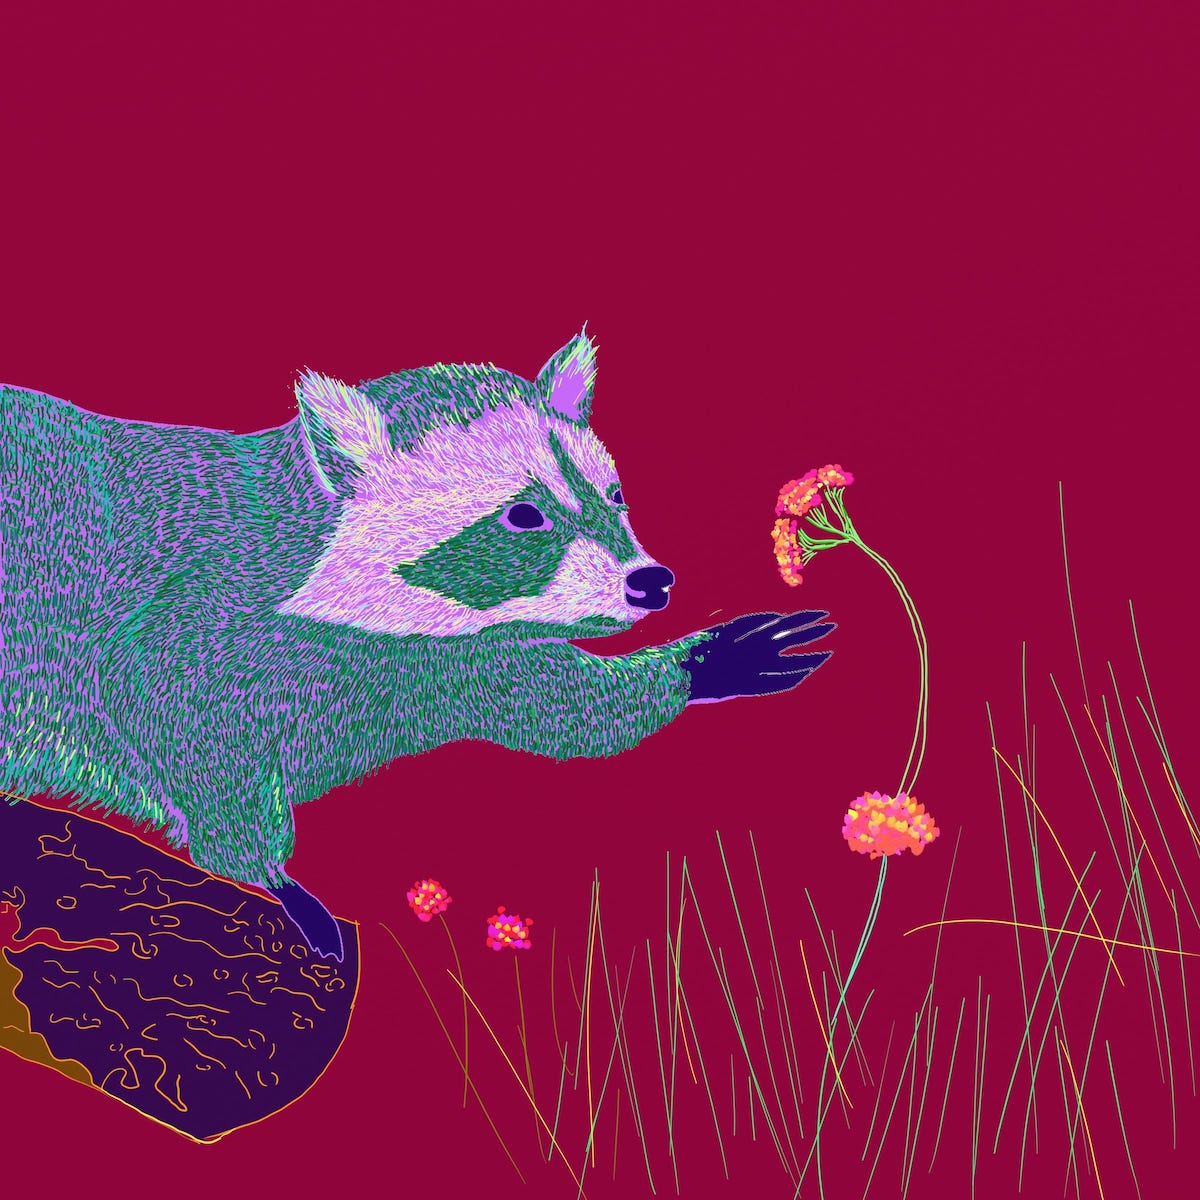 An artwork of a racoon by Sonny Bean